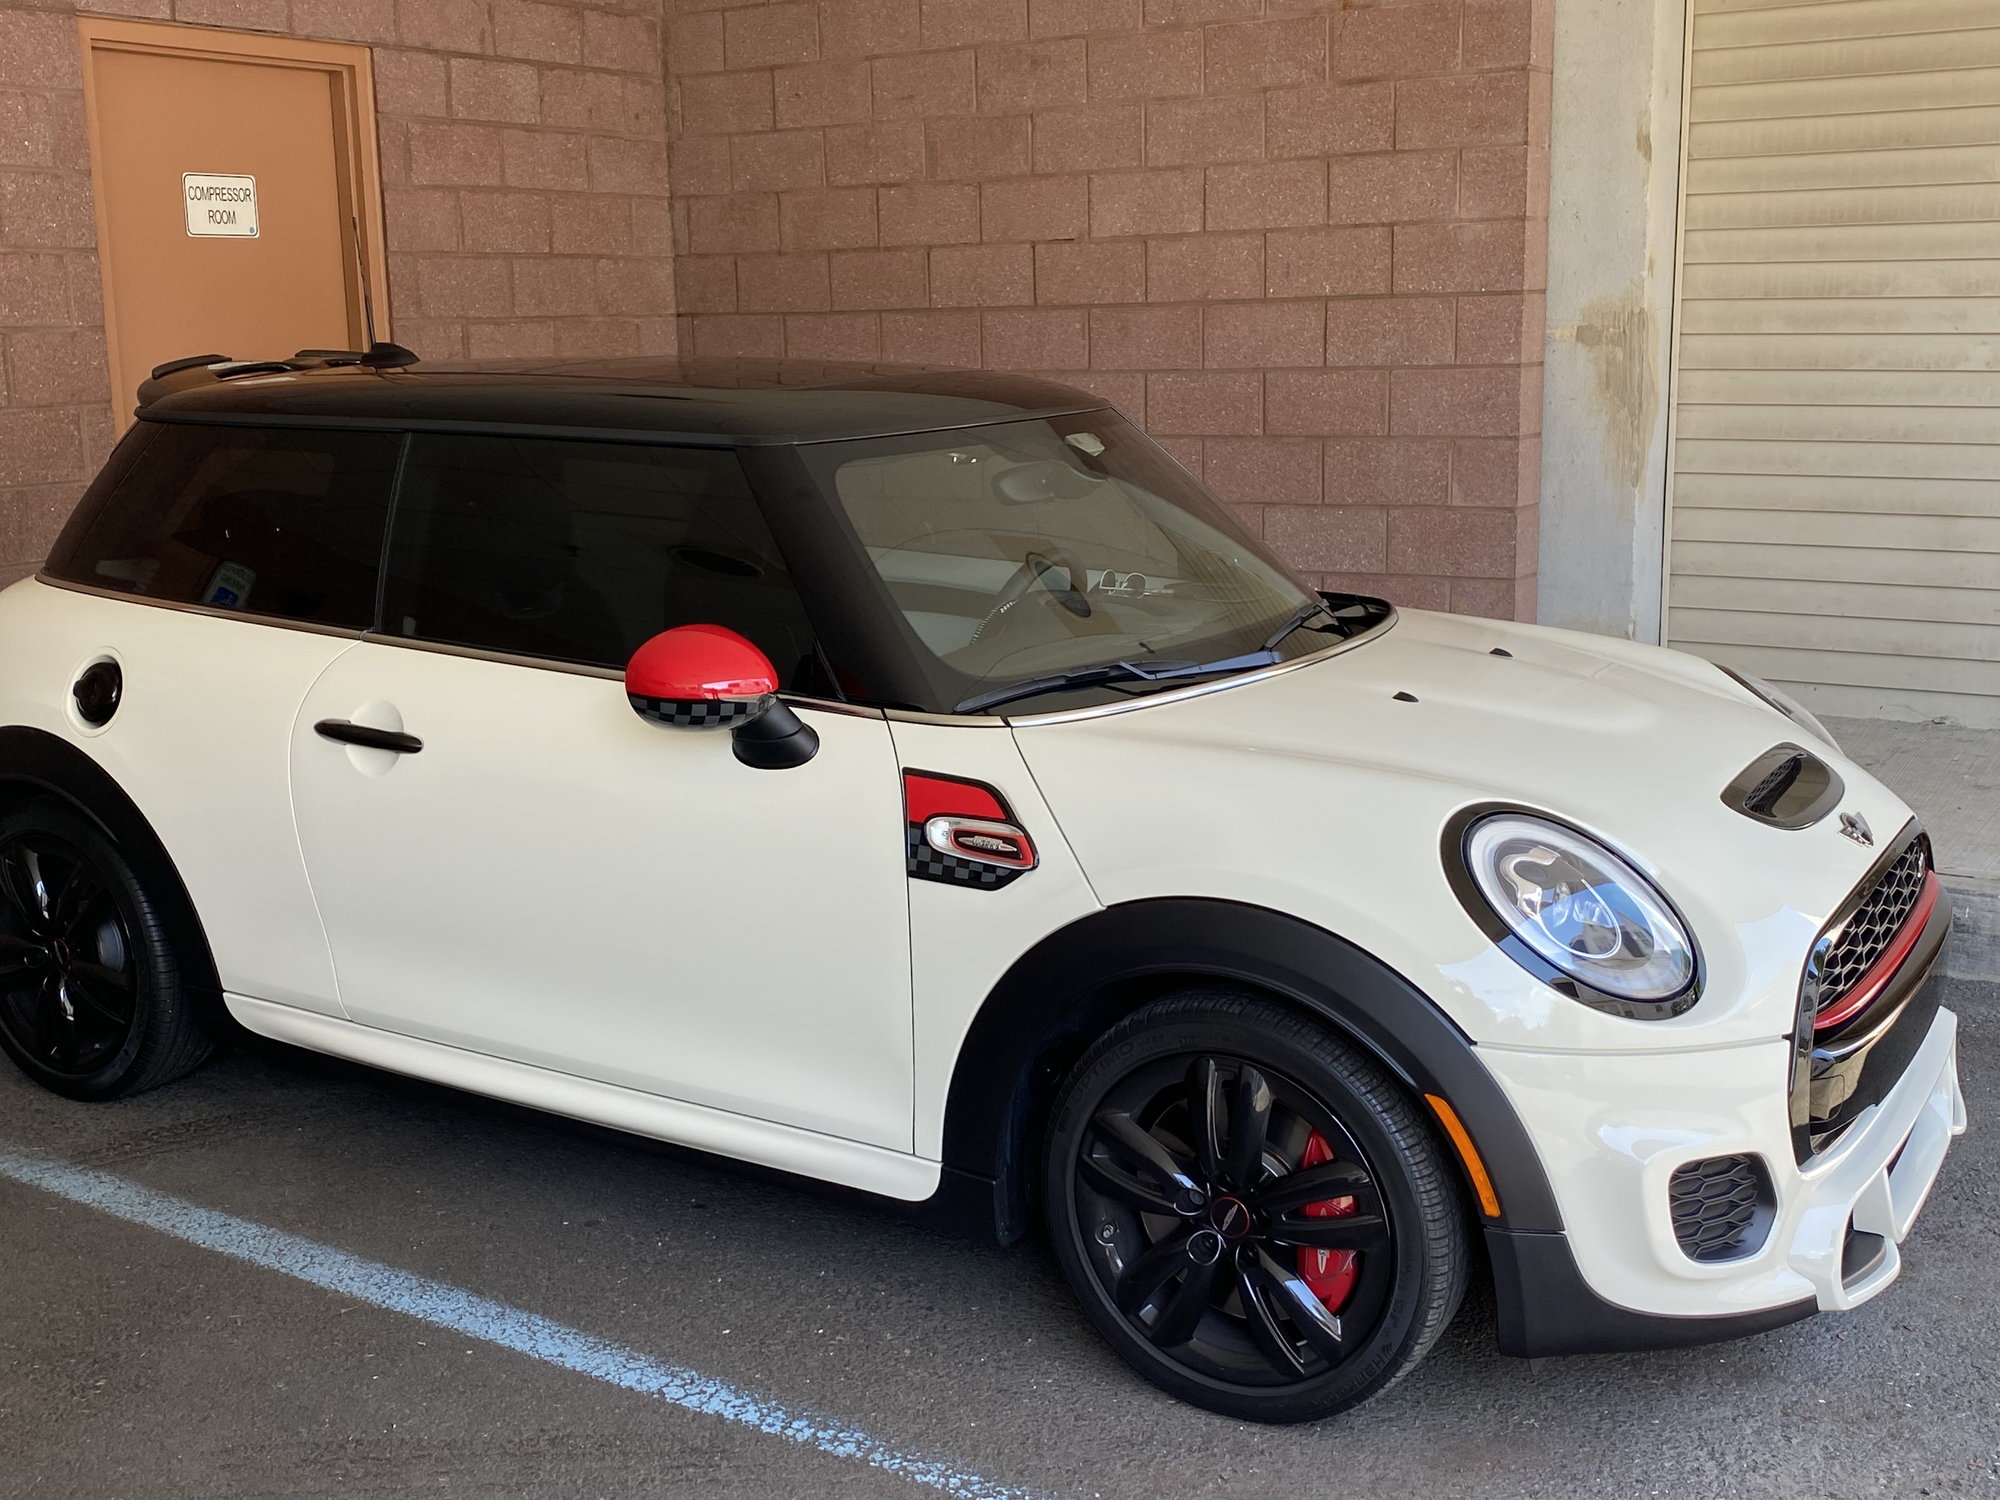 F55/F56 New to me ‘15 JCW Pepper White! - North American Motoring